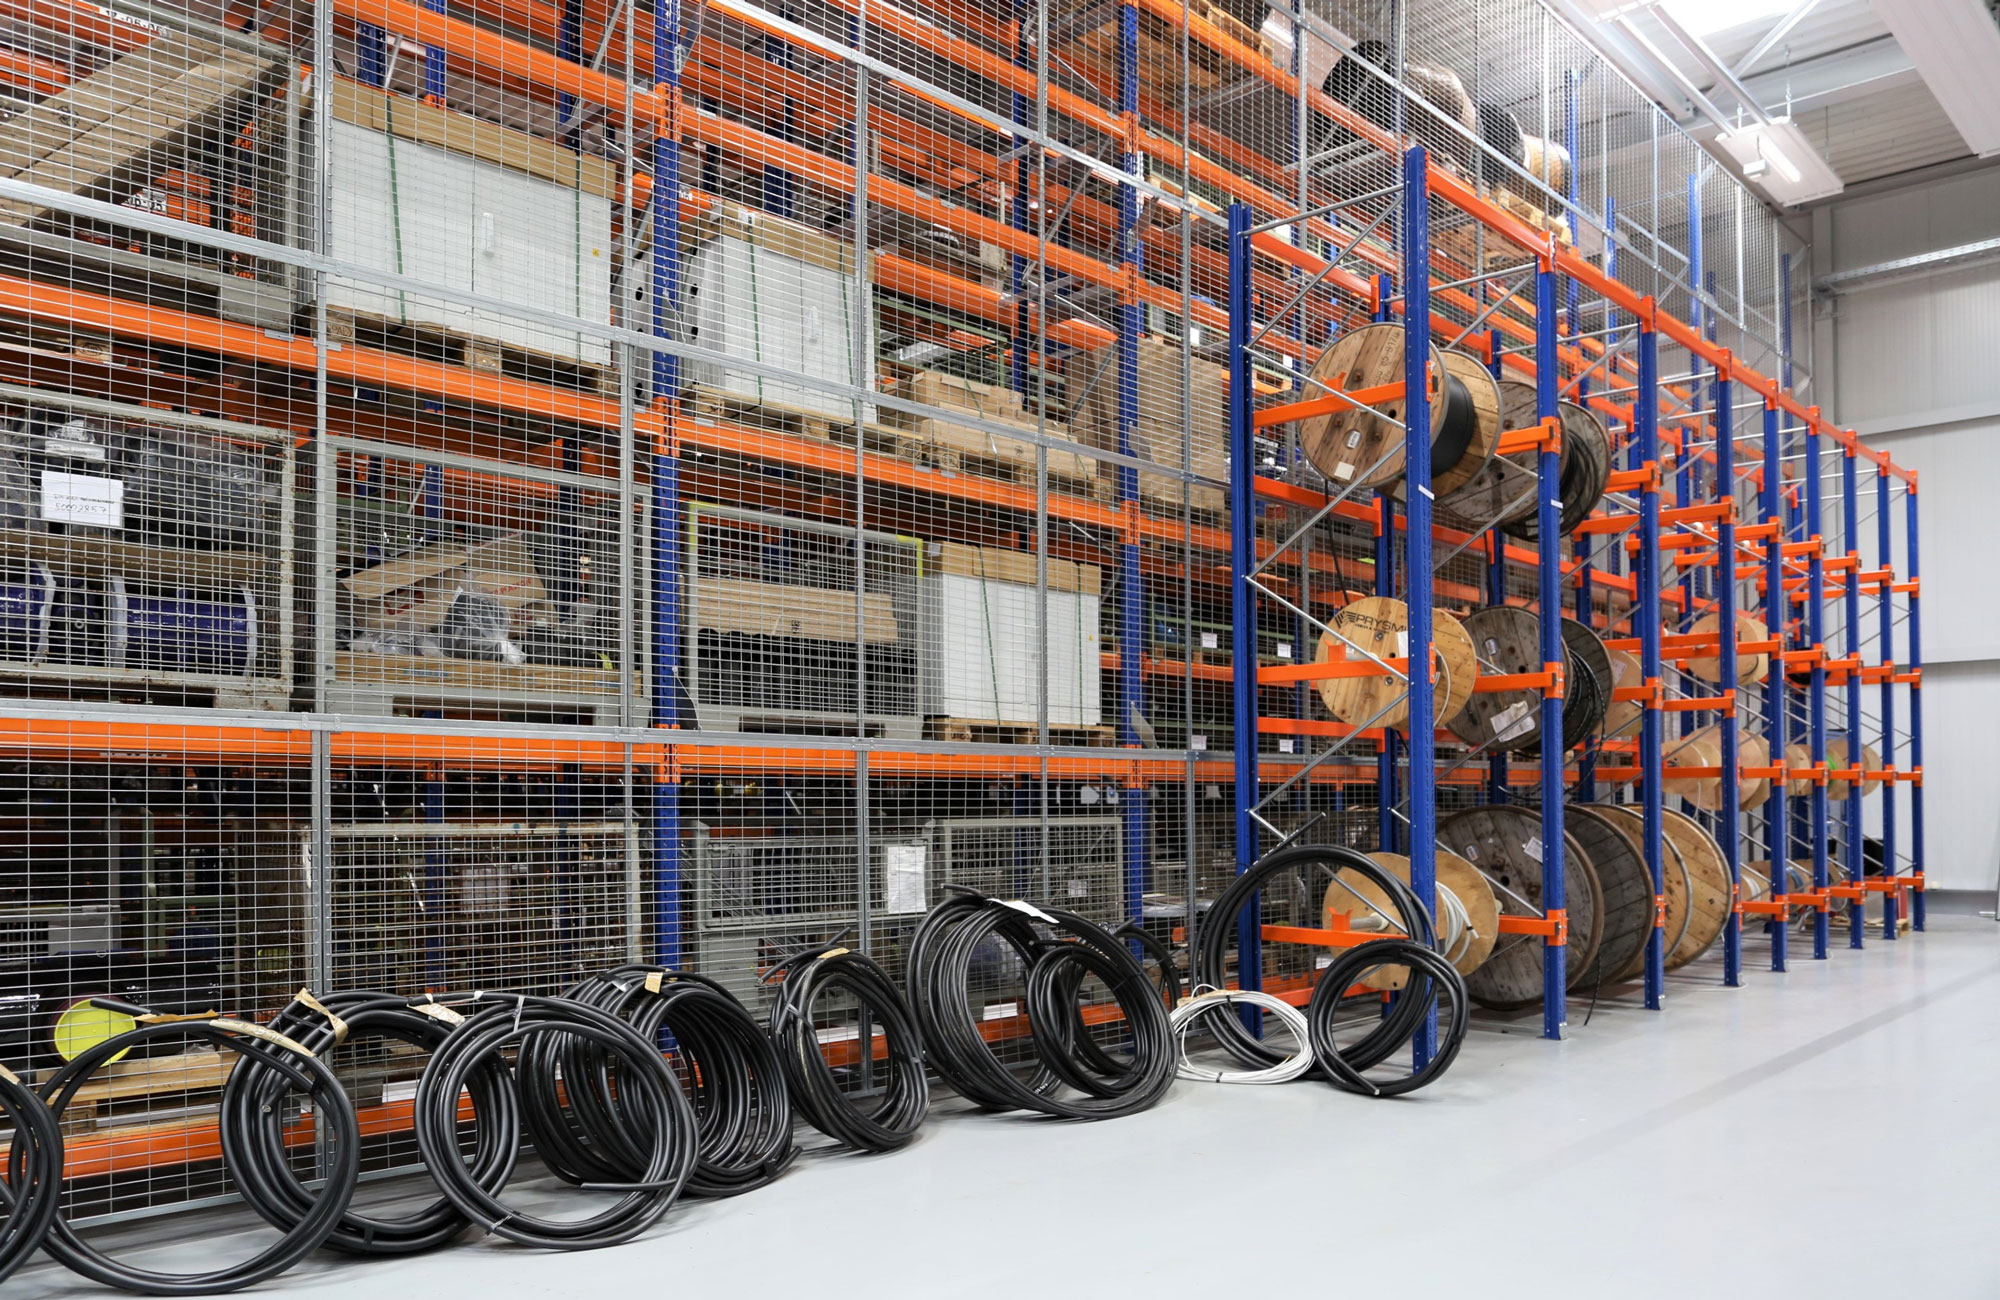 https://www.stow-group.com/sites/default/files/2018-09/mainz-cable-reel-racking.jpg